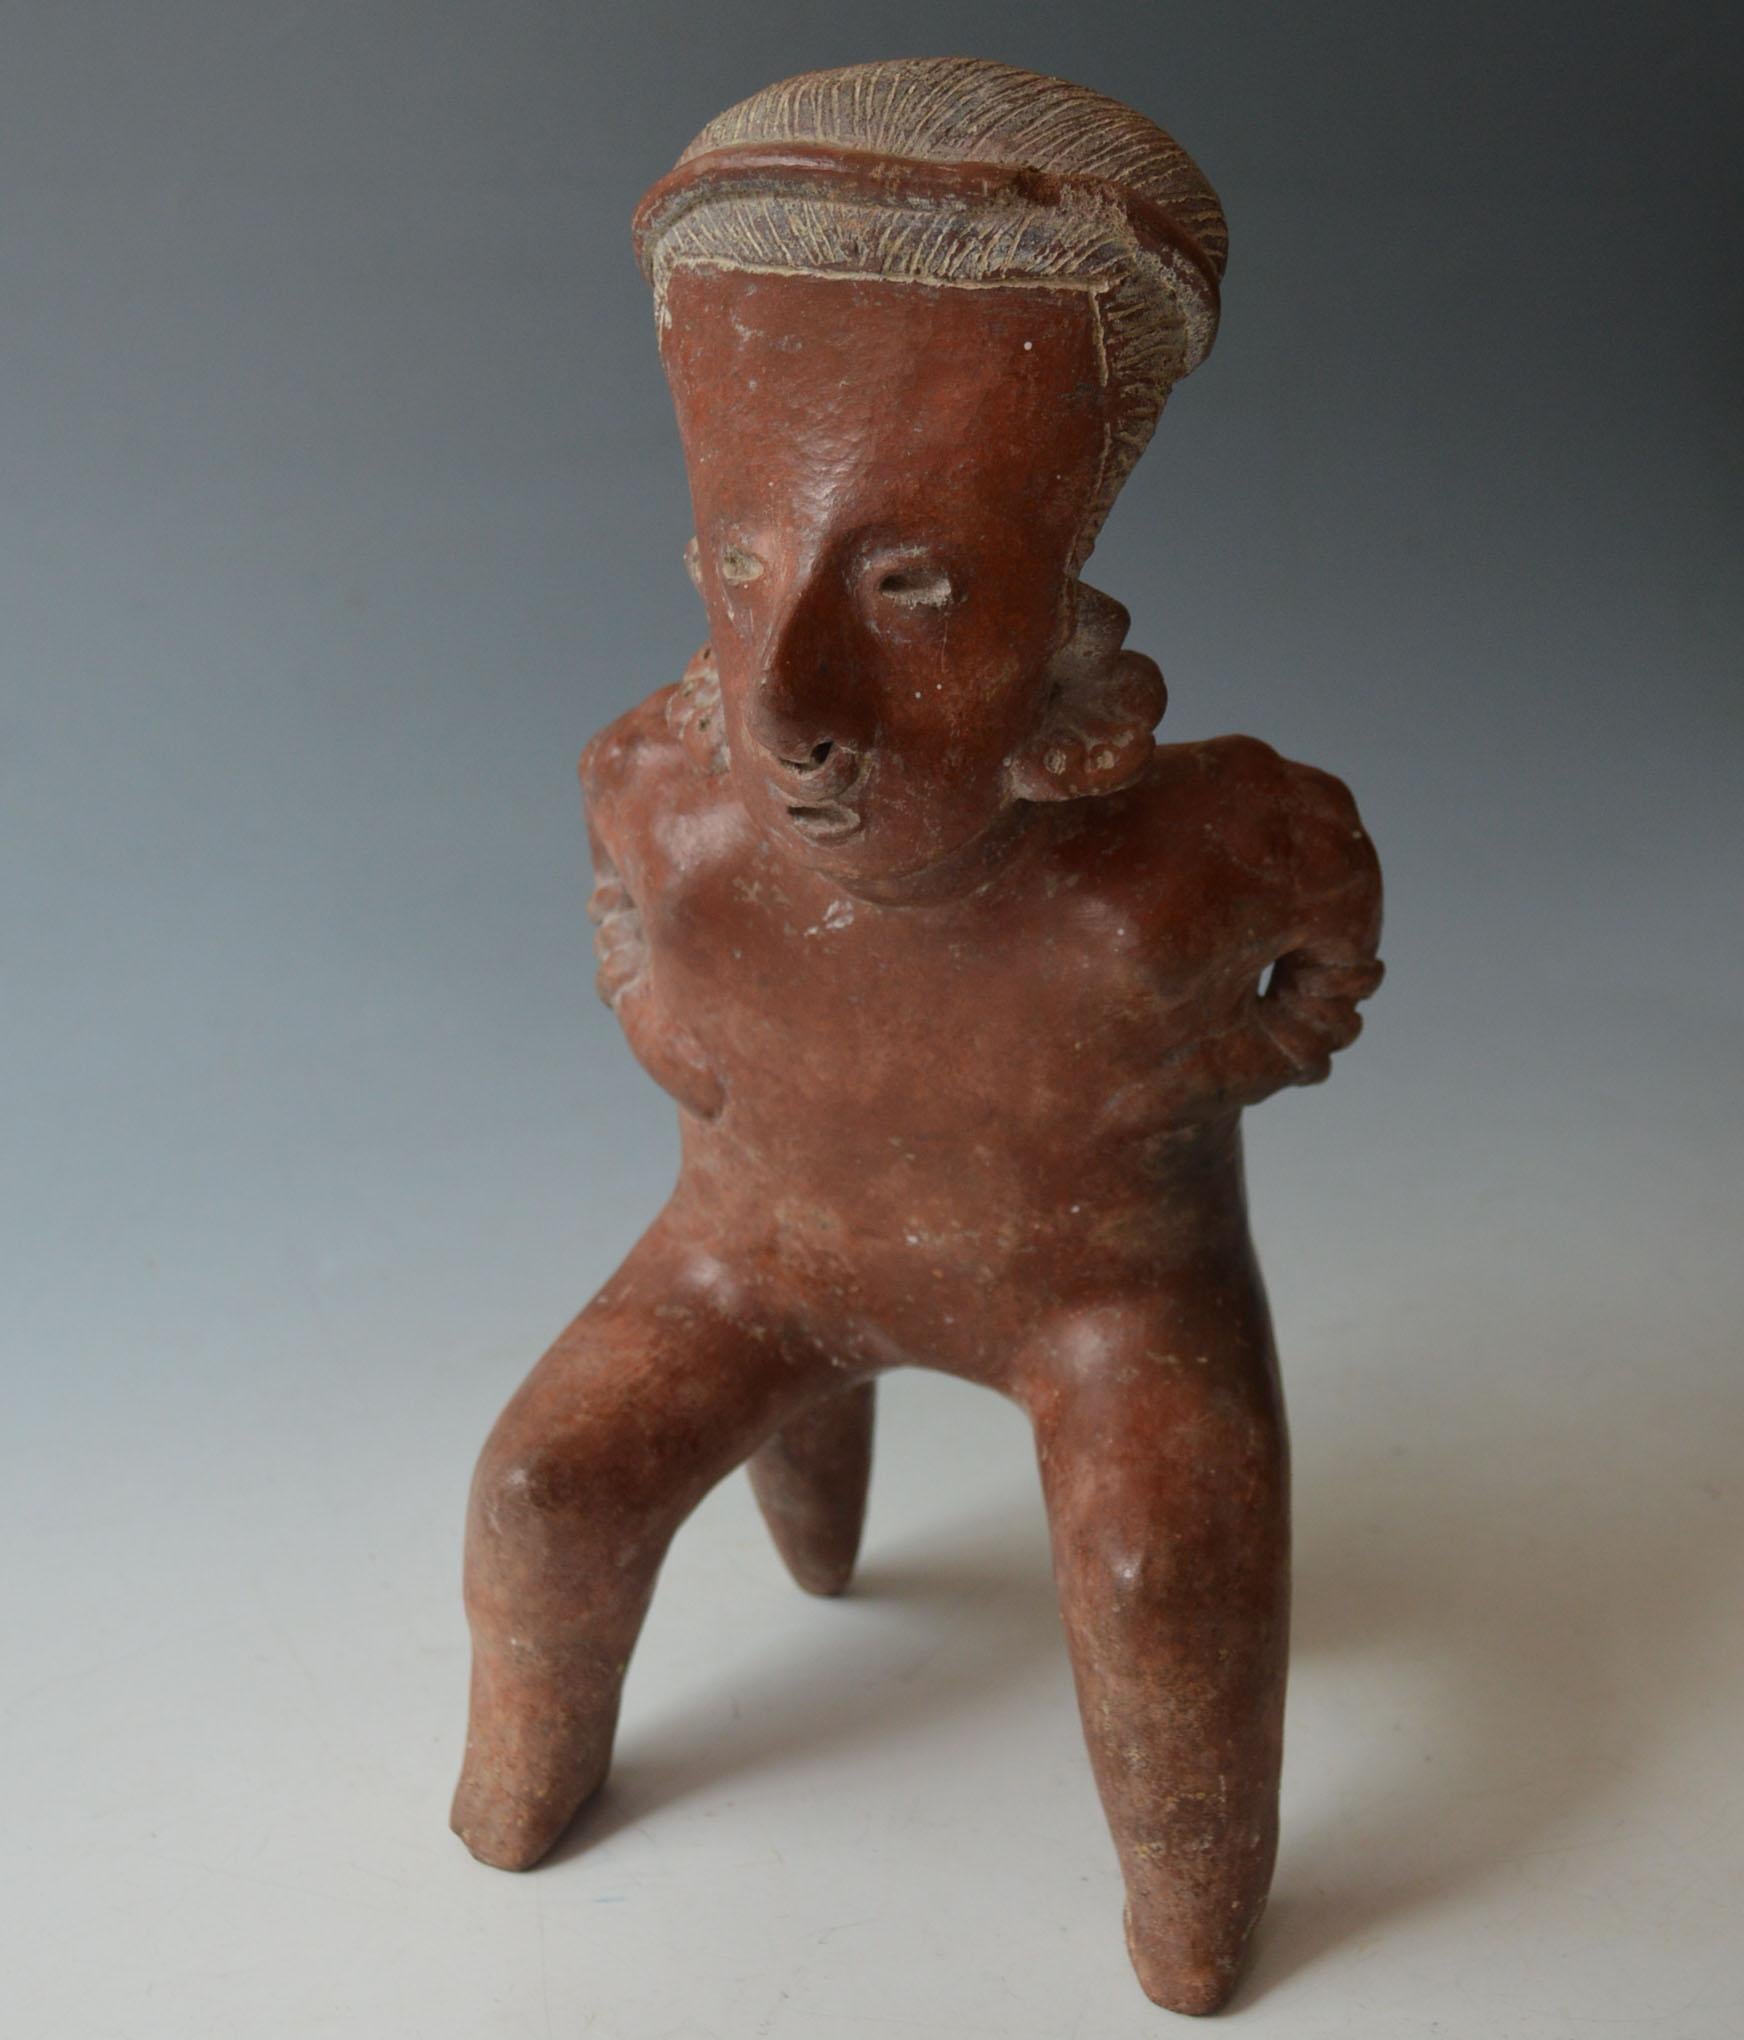 A Pre Columbian Jalisco seated figure
Jalisco West Mexico  circa B.C. 100-300 A.D,

A  Male pottery figure with red slip with elongated head and linear delineated hair wearing ear and nose ornaments,  the slim body  finely modelled with hands on